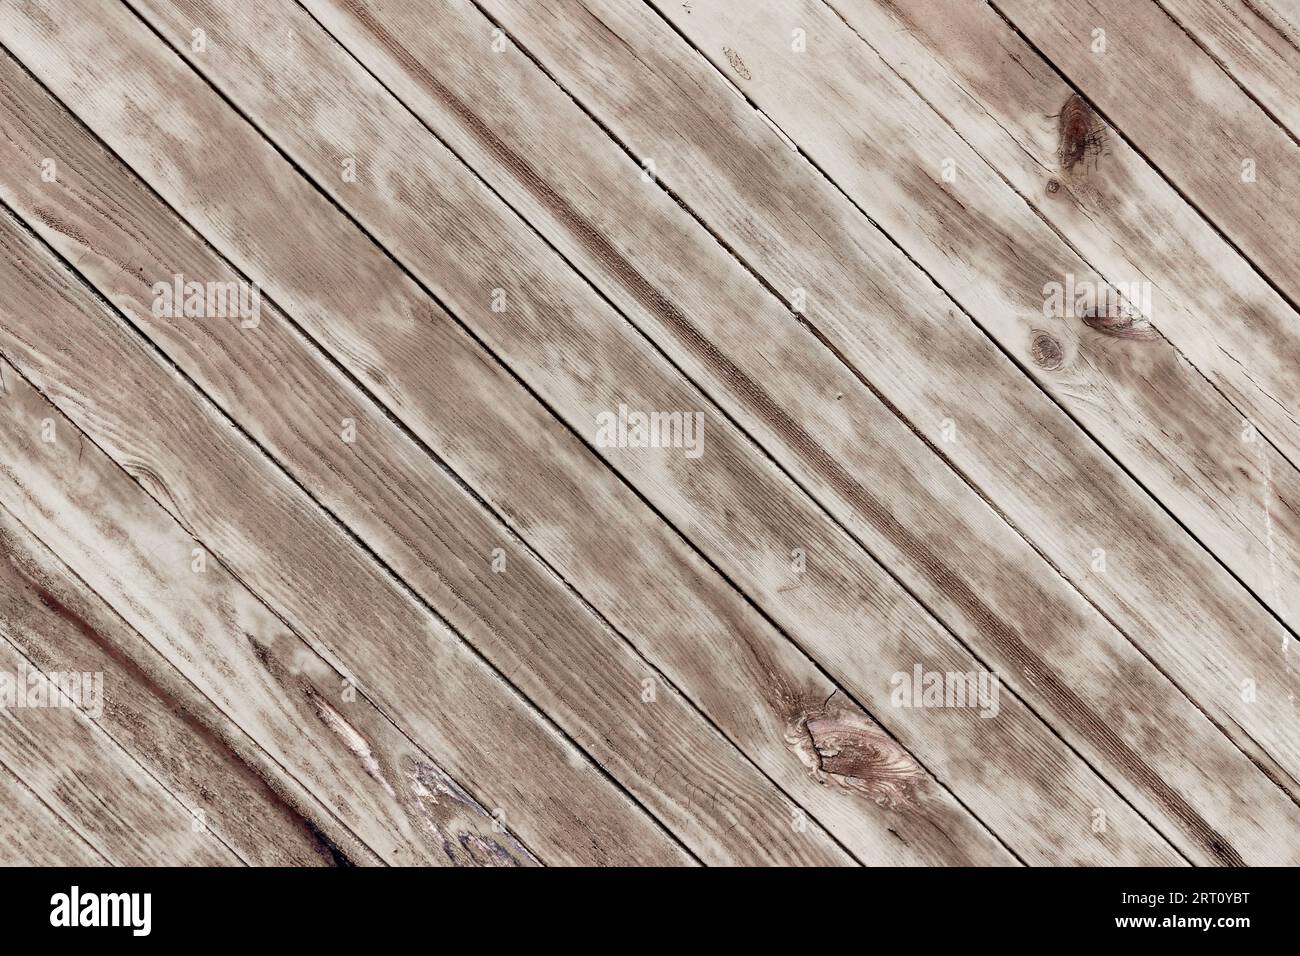 Abstract detail of the surface of wooden slats Stock Photo